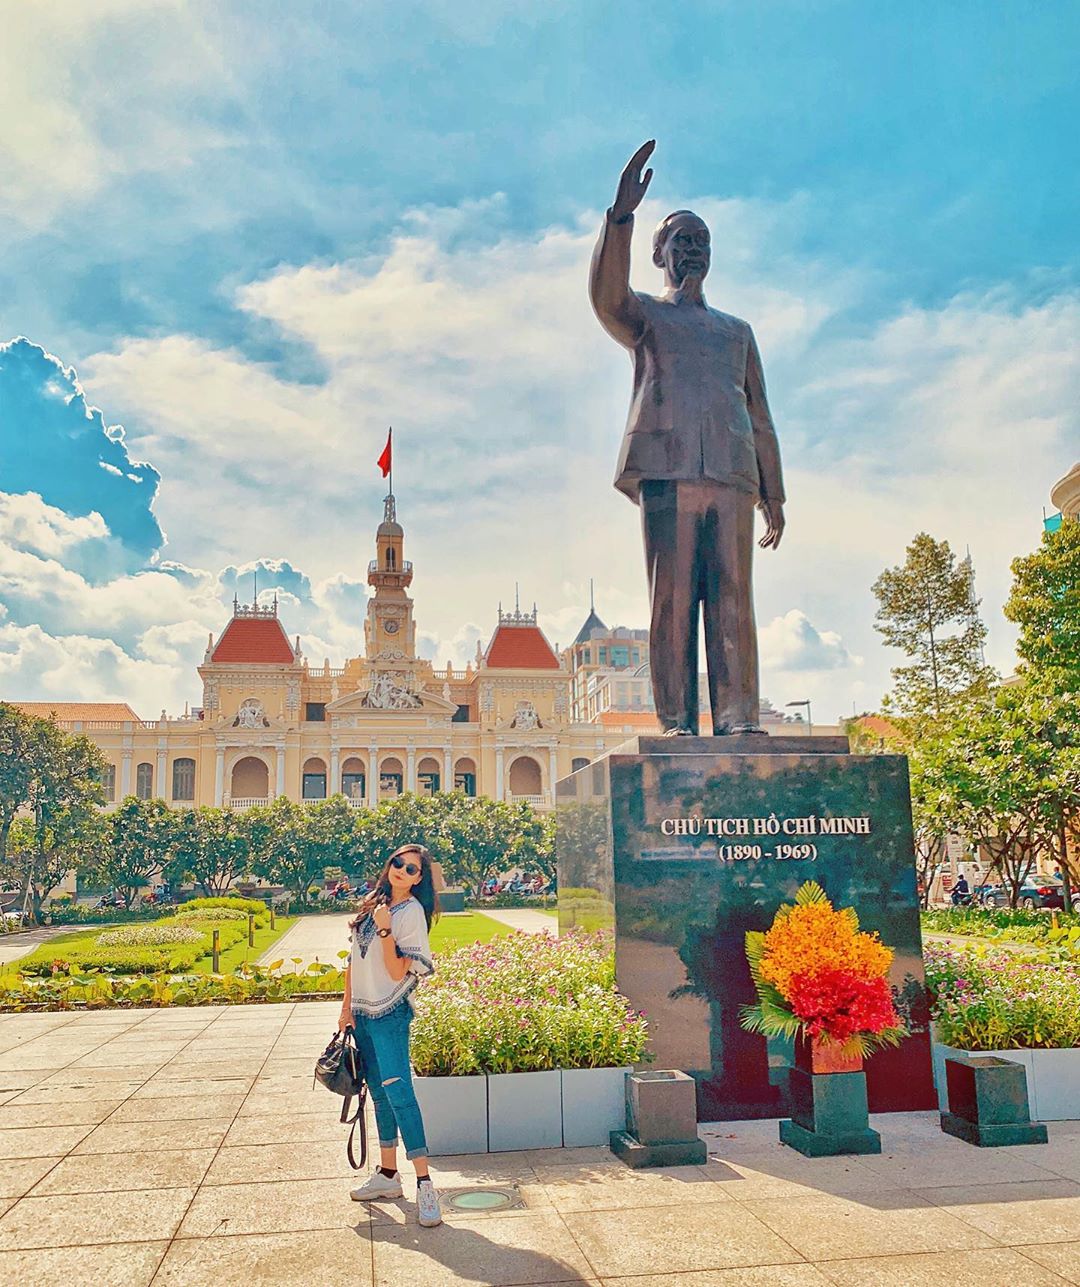 Peoples Committee, Nguyen Hue, Ho Chi Minh City